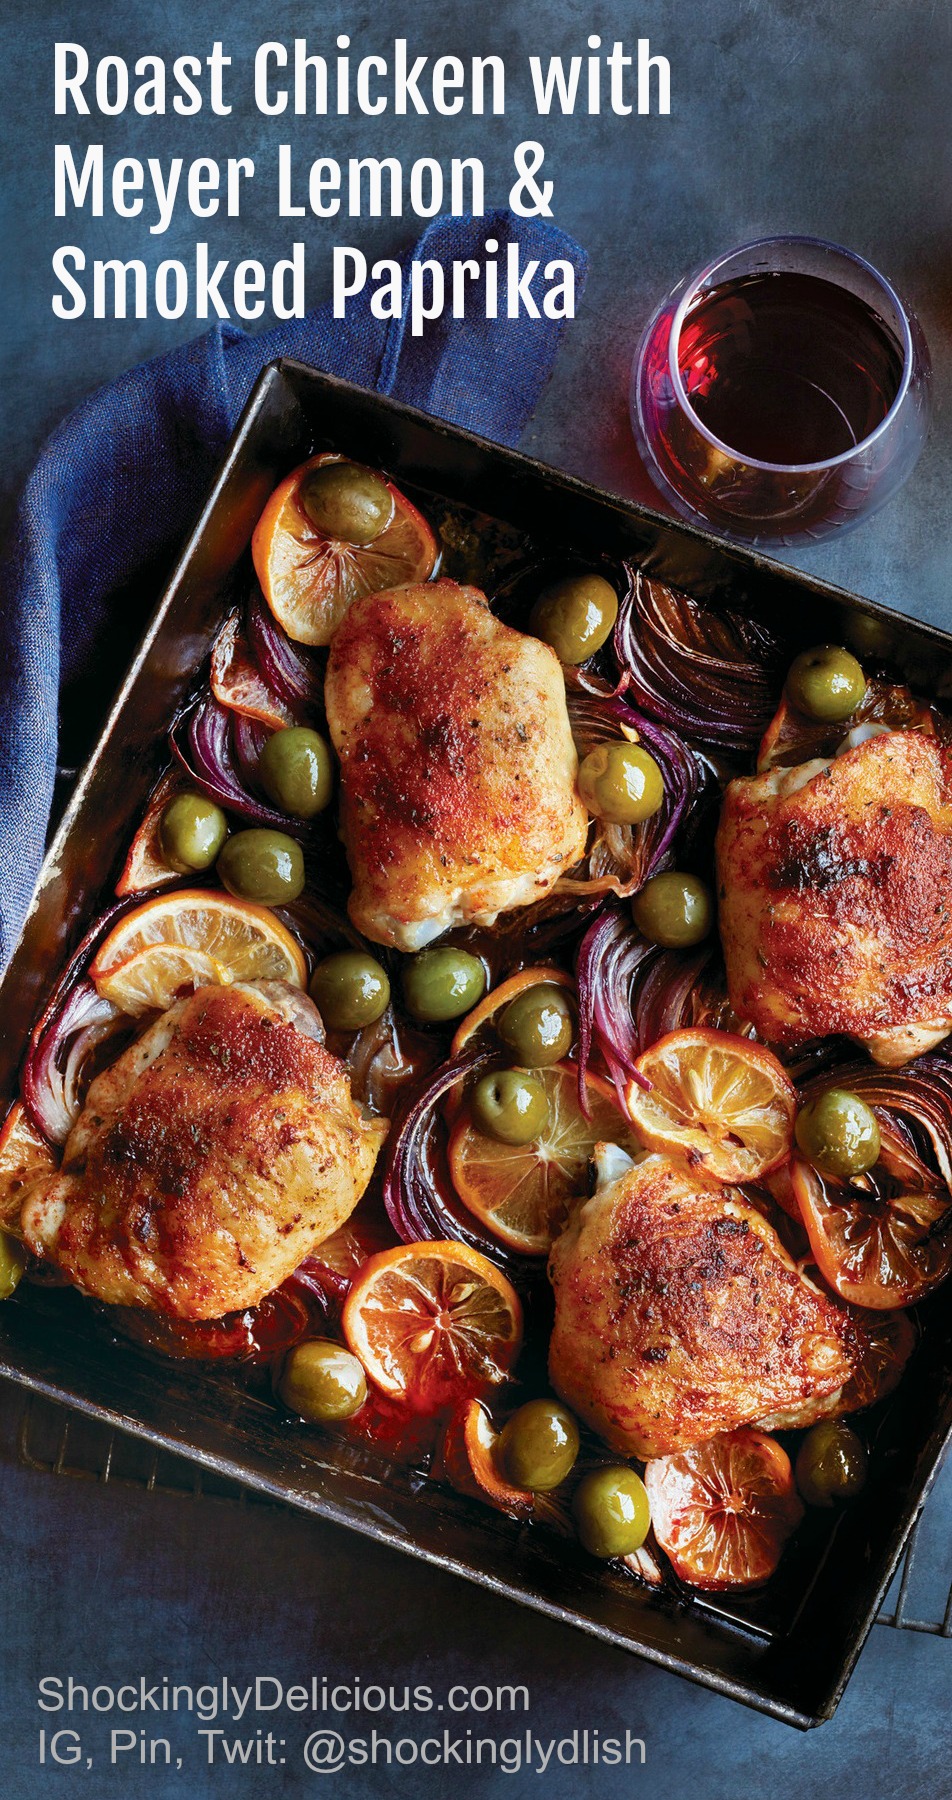 Roast Chicken with Meyer Lemon and Smoked Paprika easy recipe